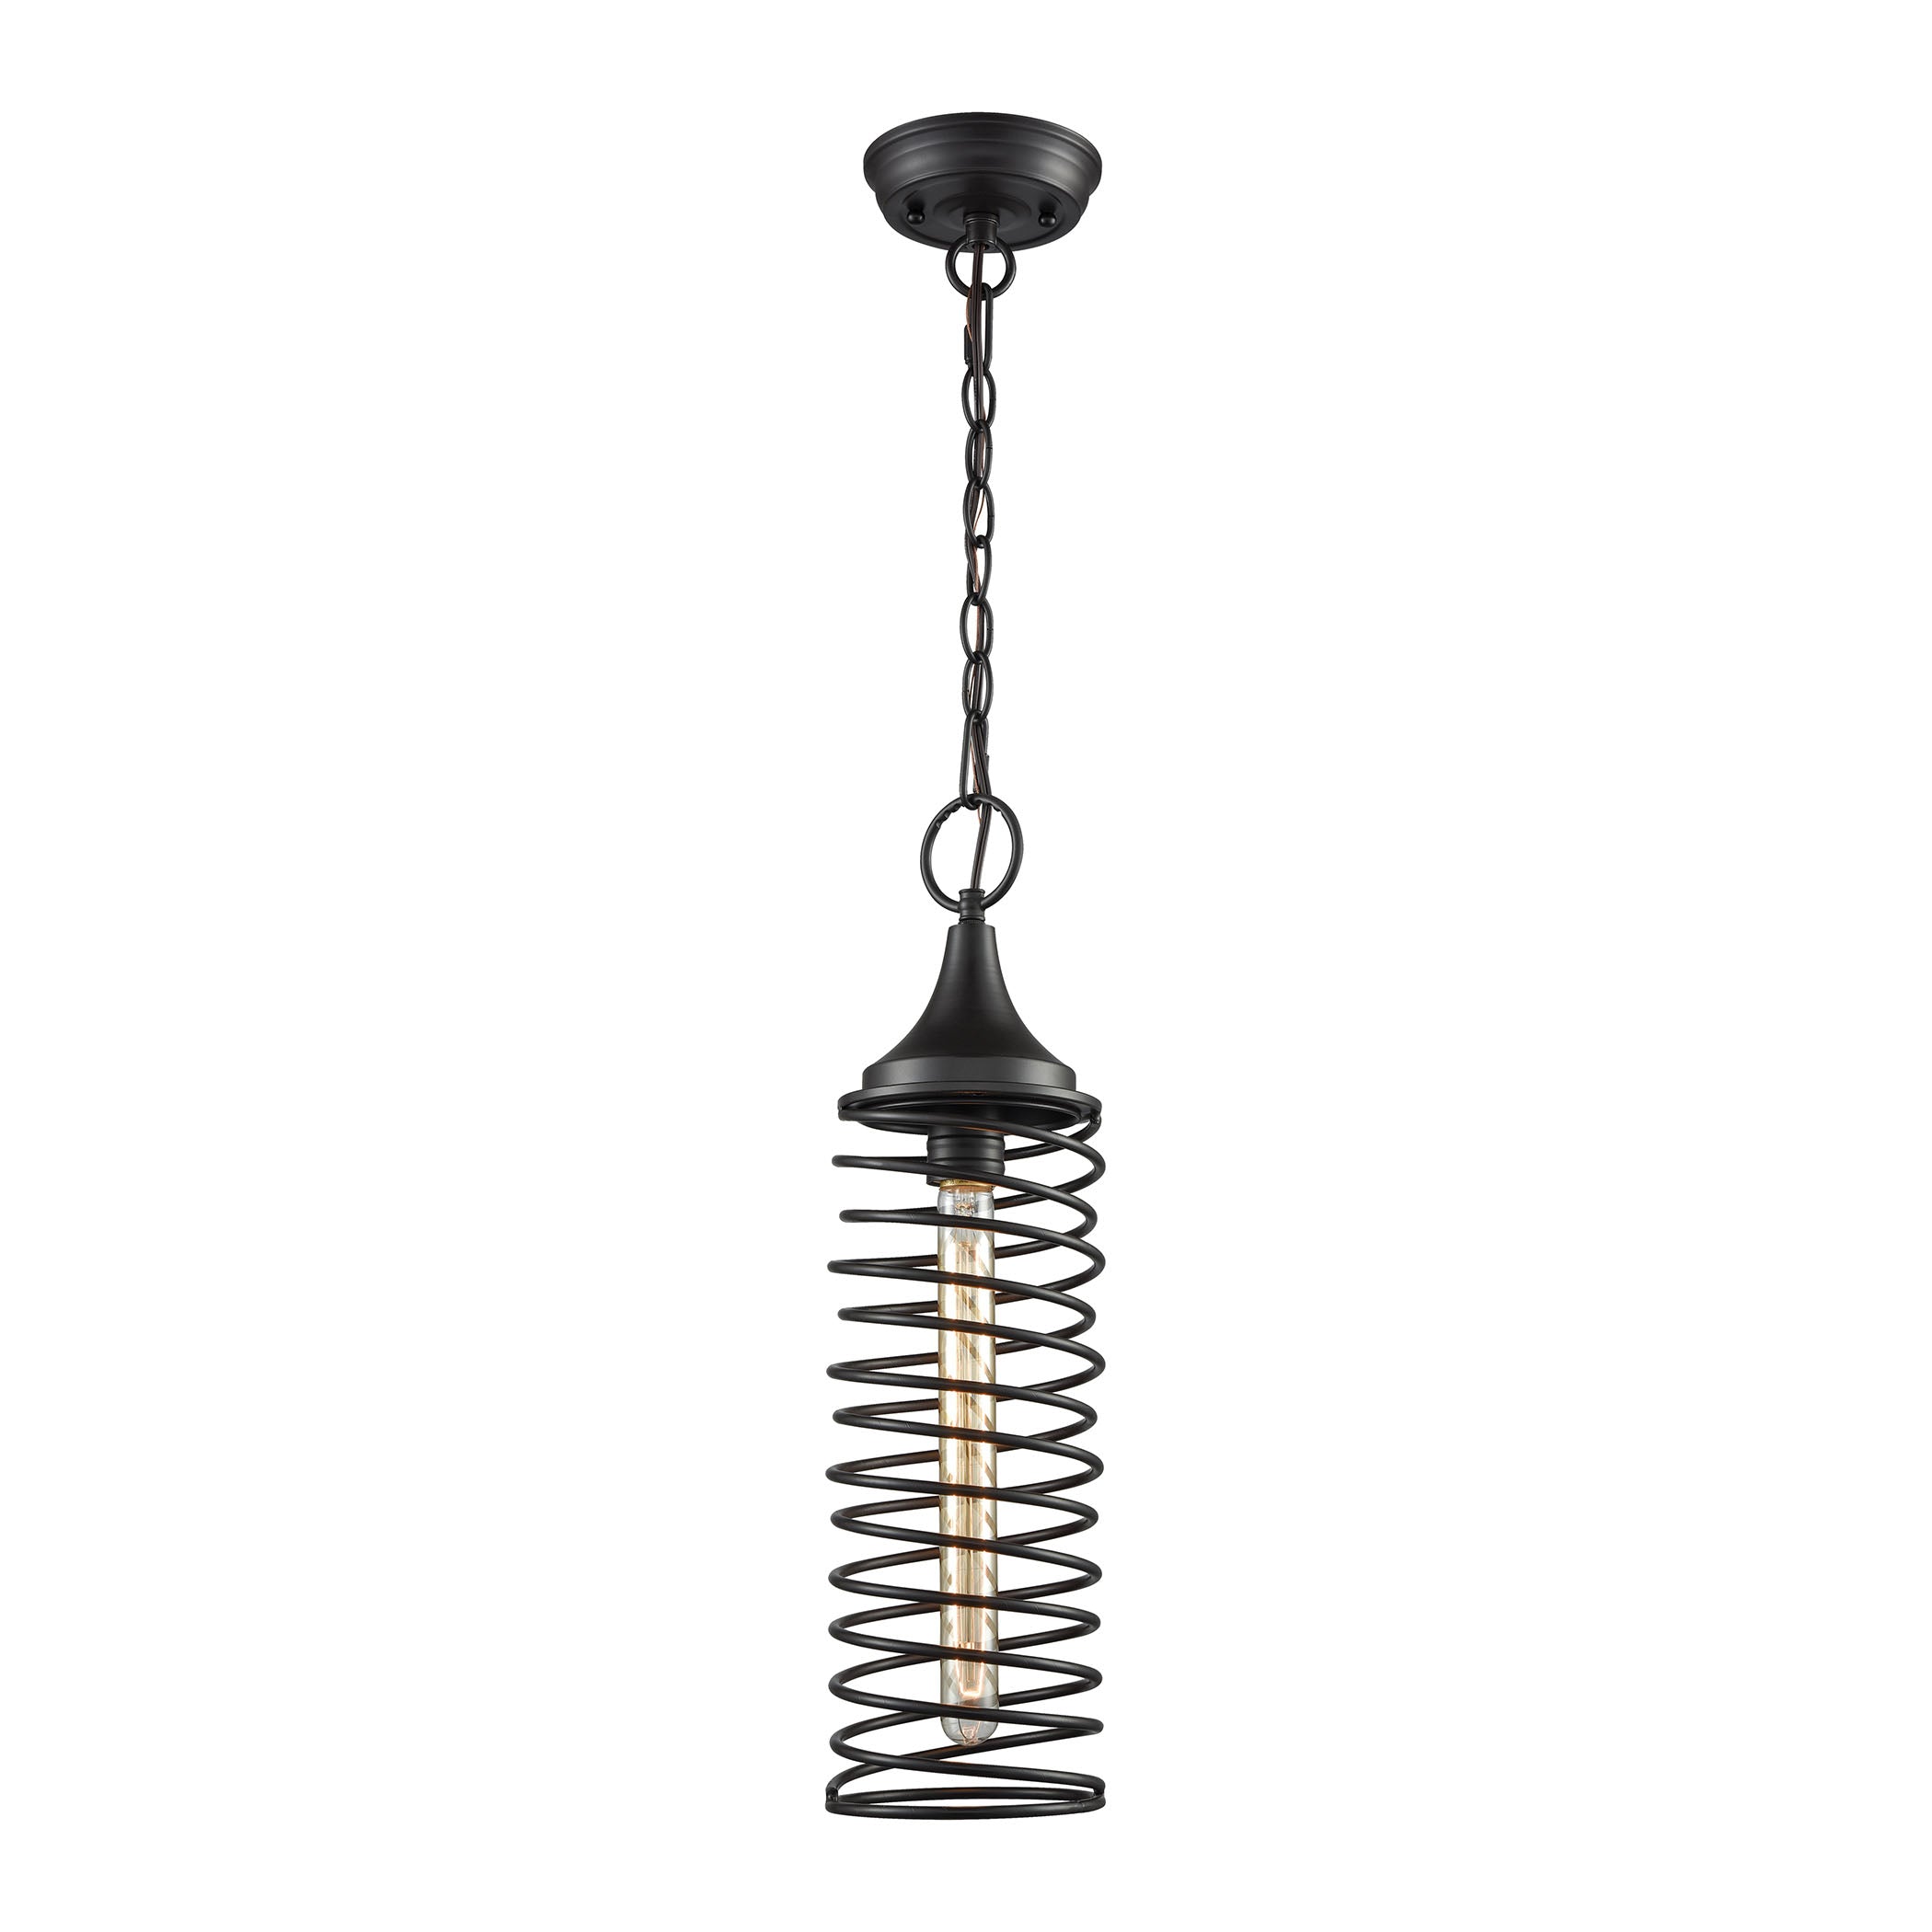 ELK Lighting 65231/1-LA Spring 1-Light Mini Pendant in Oil Rubbed Bronze with Twisted Metal Shade - Includes Adapter Kit